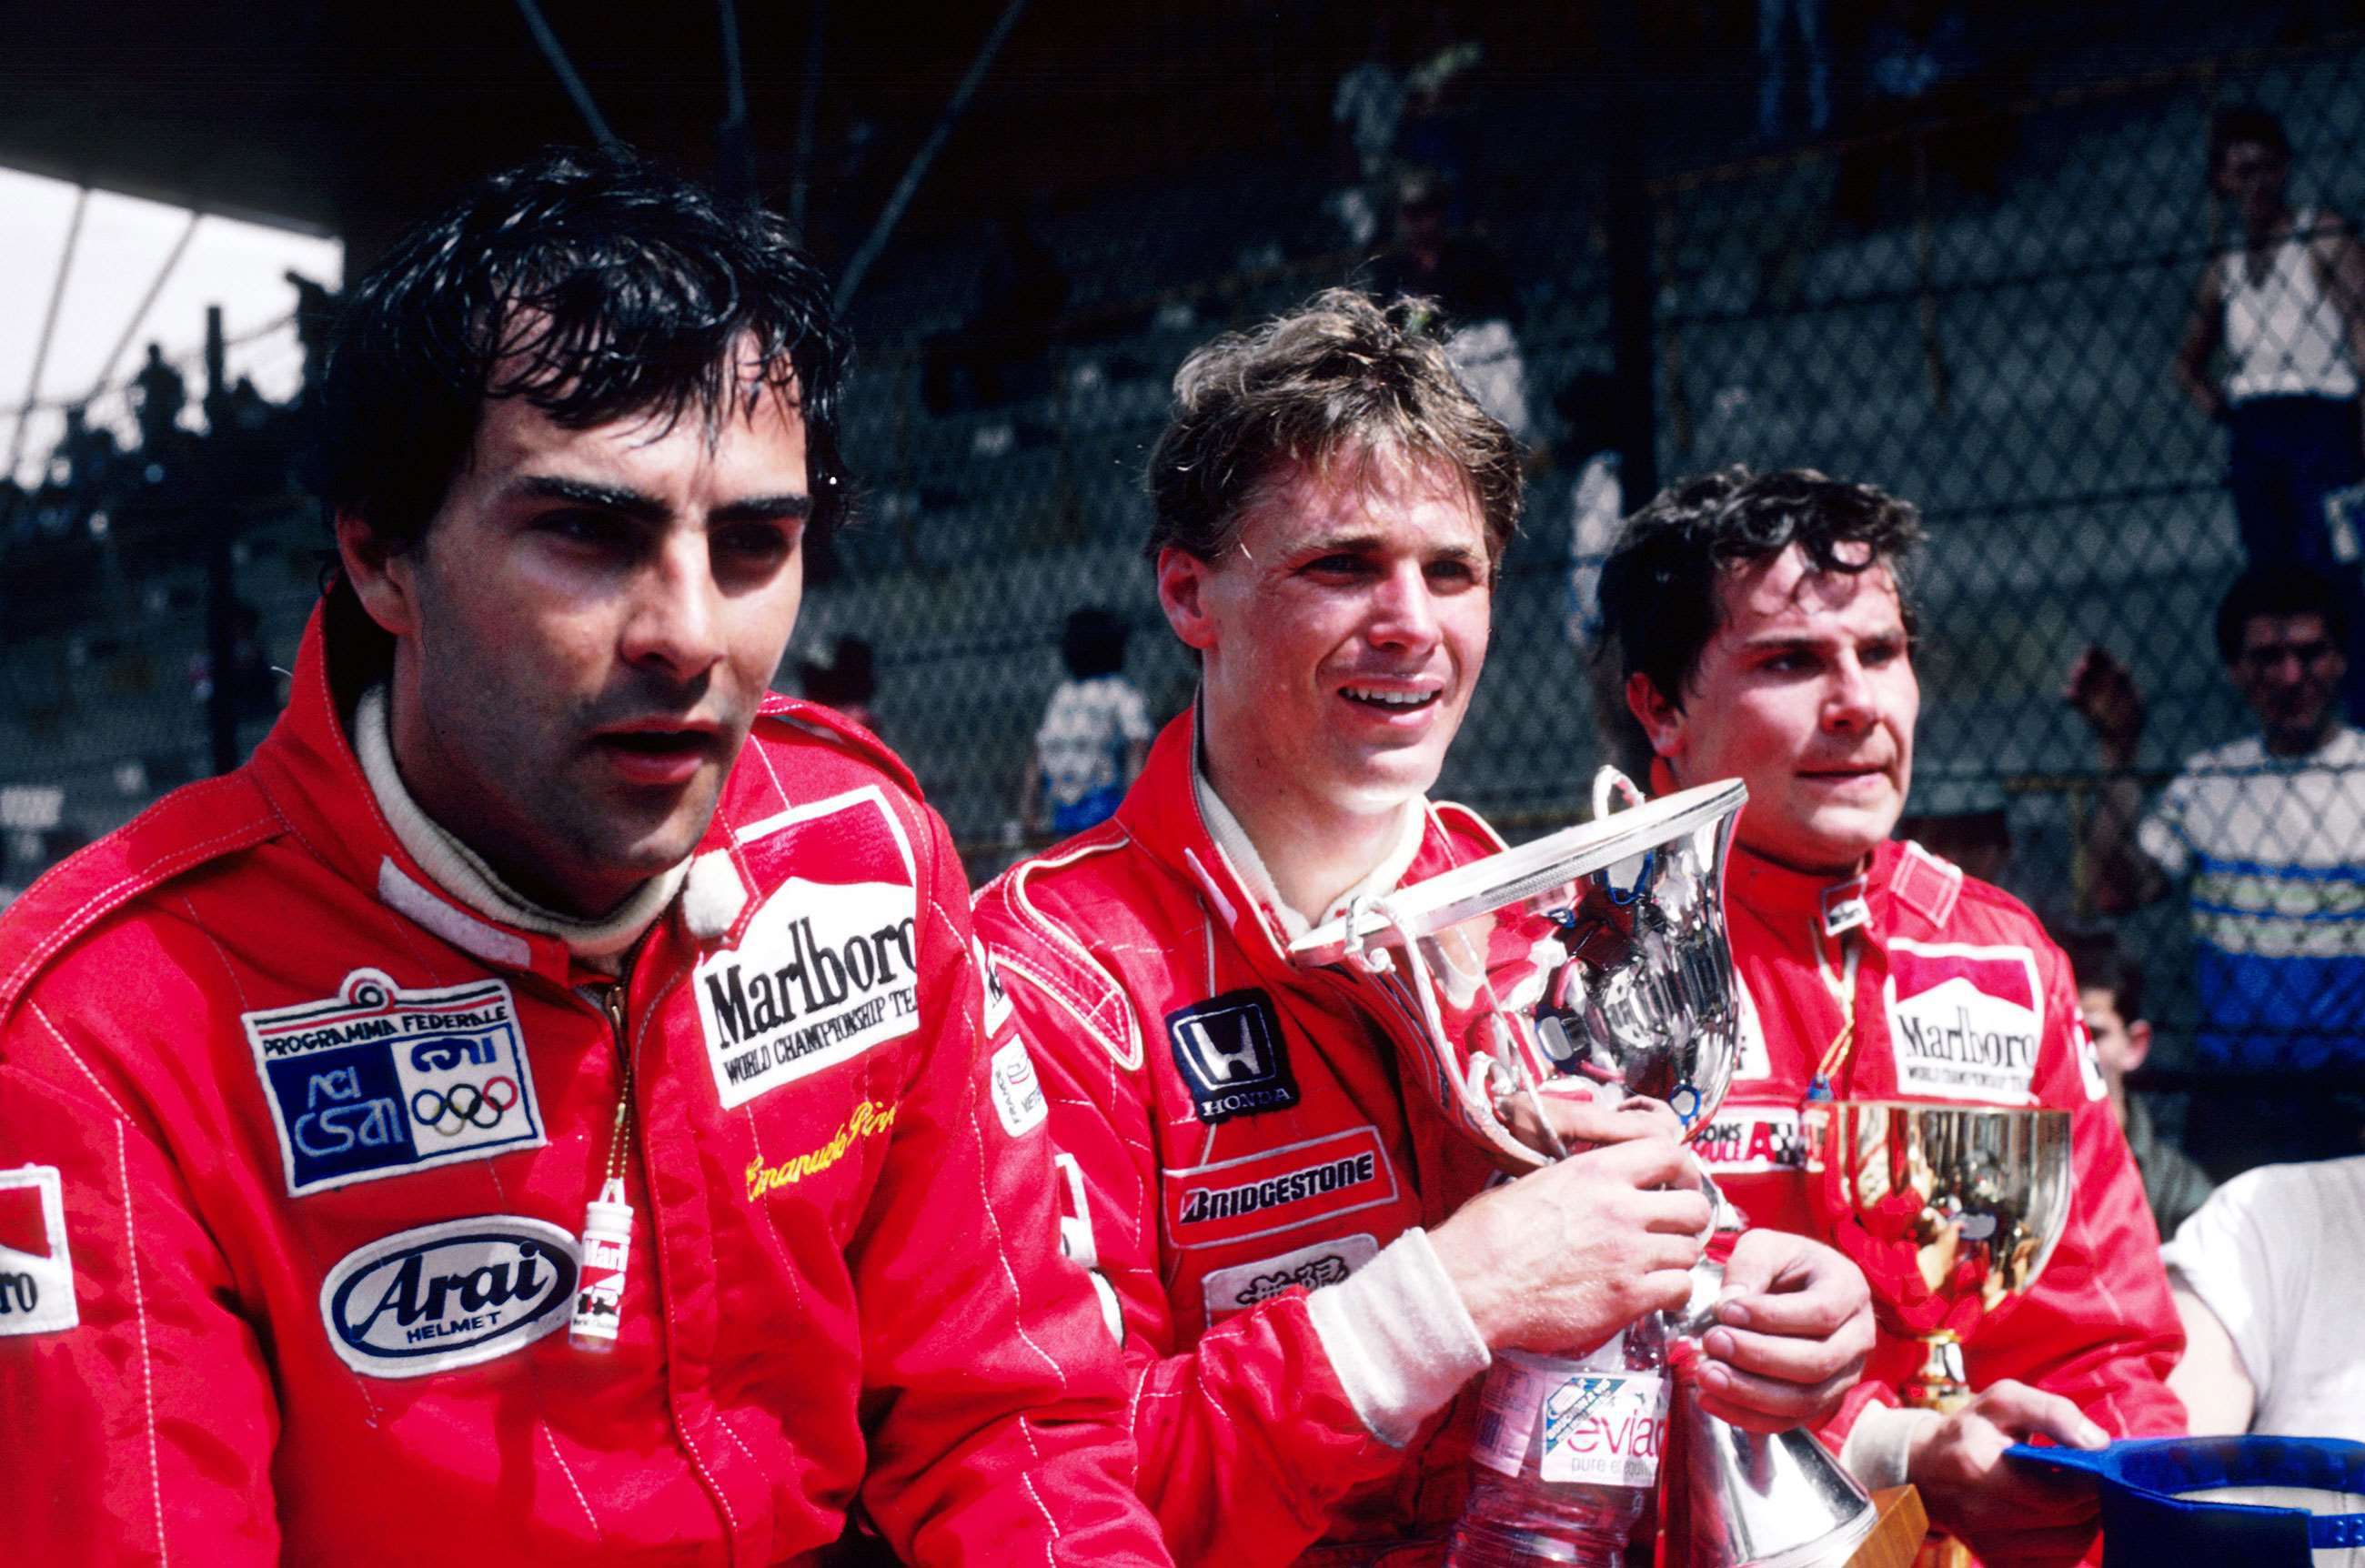 F3000 1986, France. Left to right: Emanuele Pirro, Mike Thackwell and Michel Ferte.